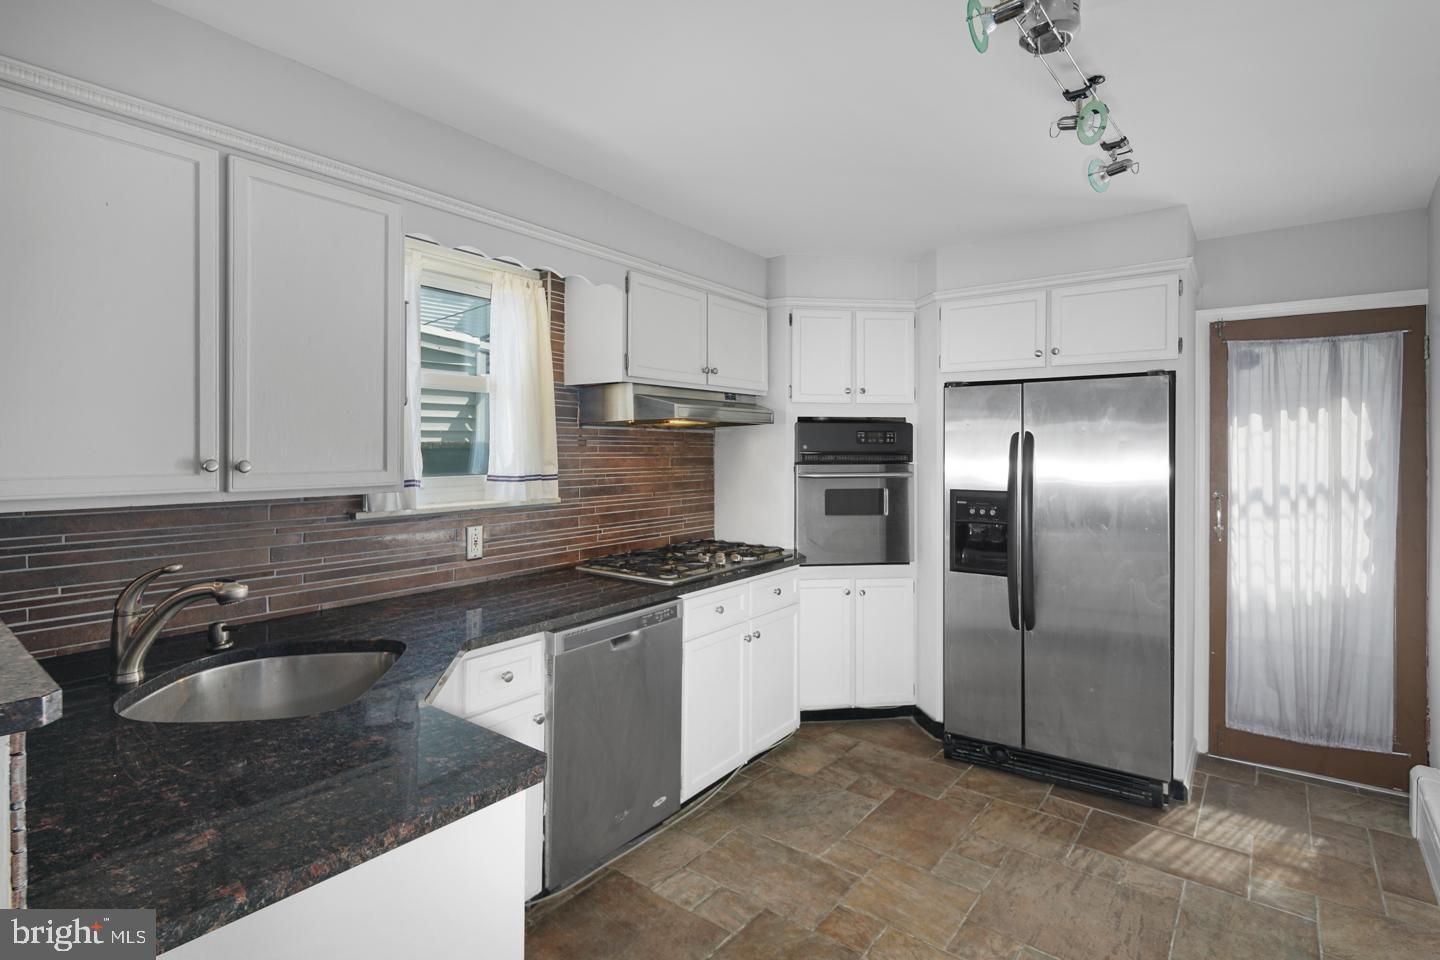 a kitchen with granite countertop a sink stainless steel appliances and window